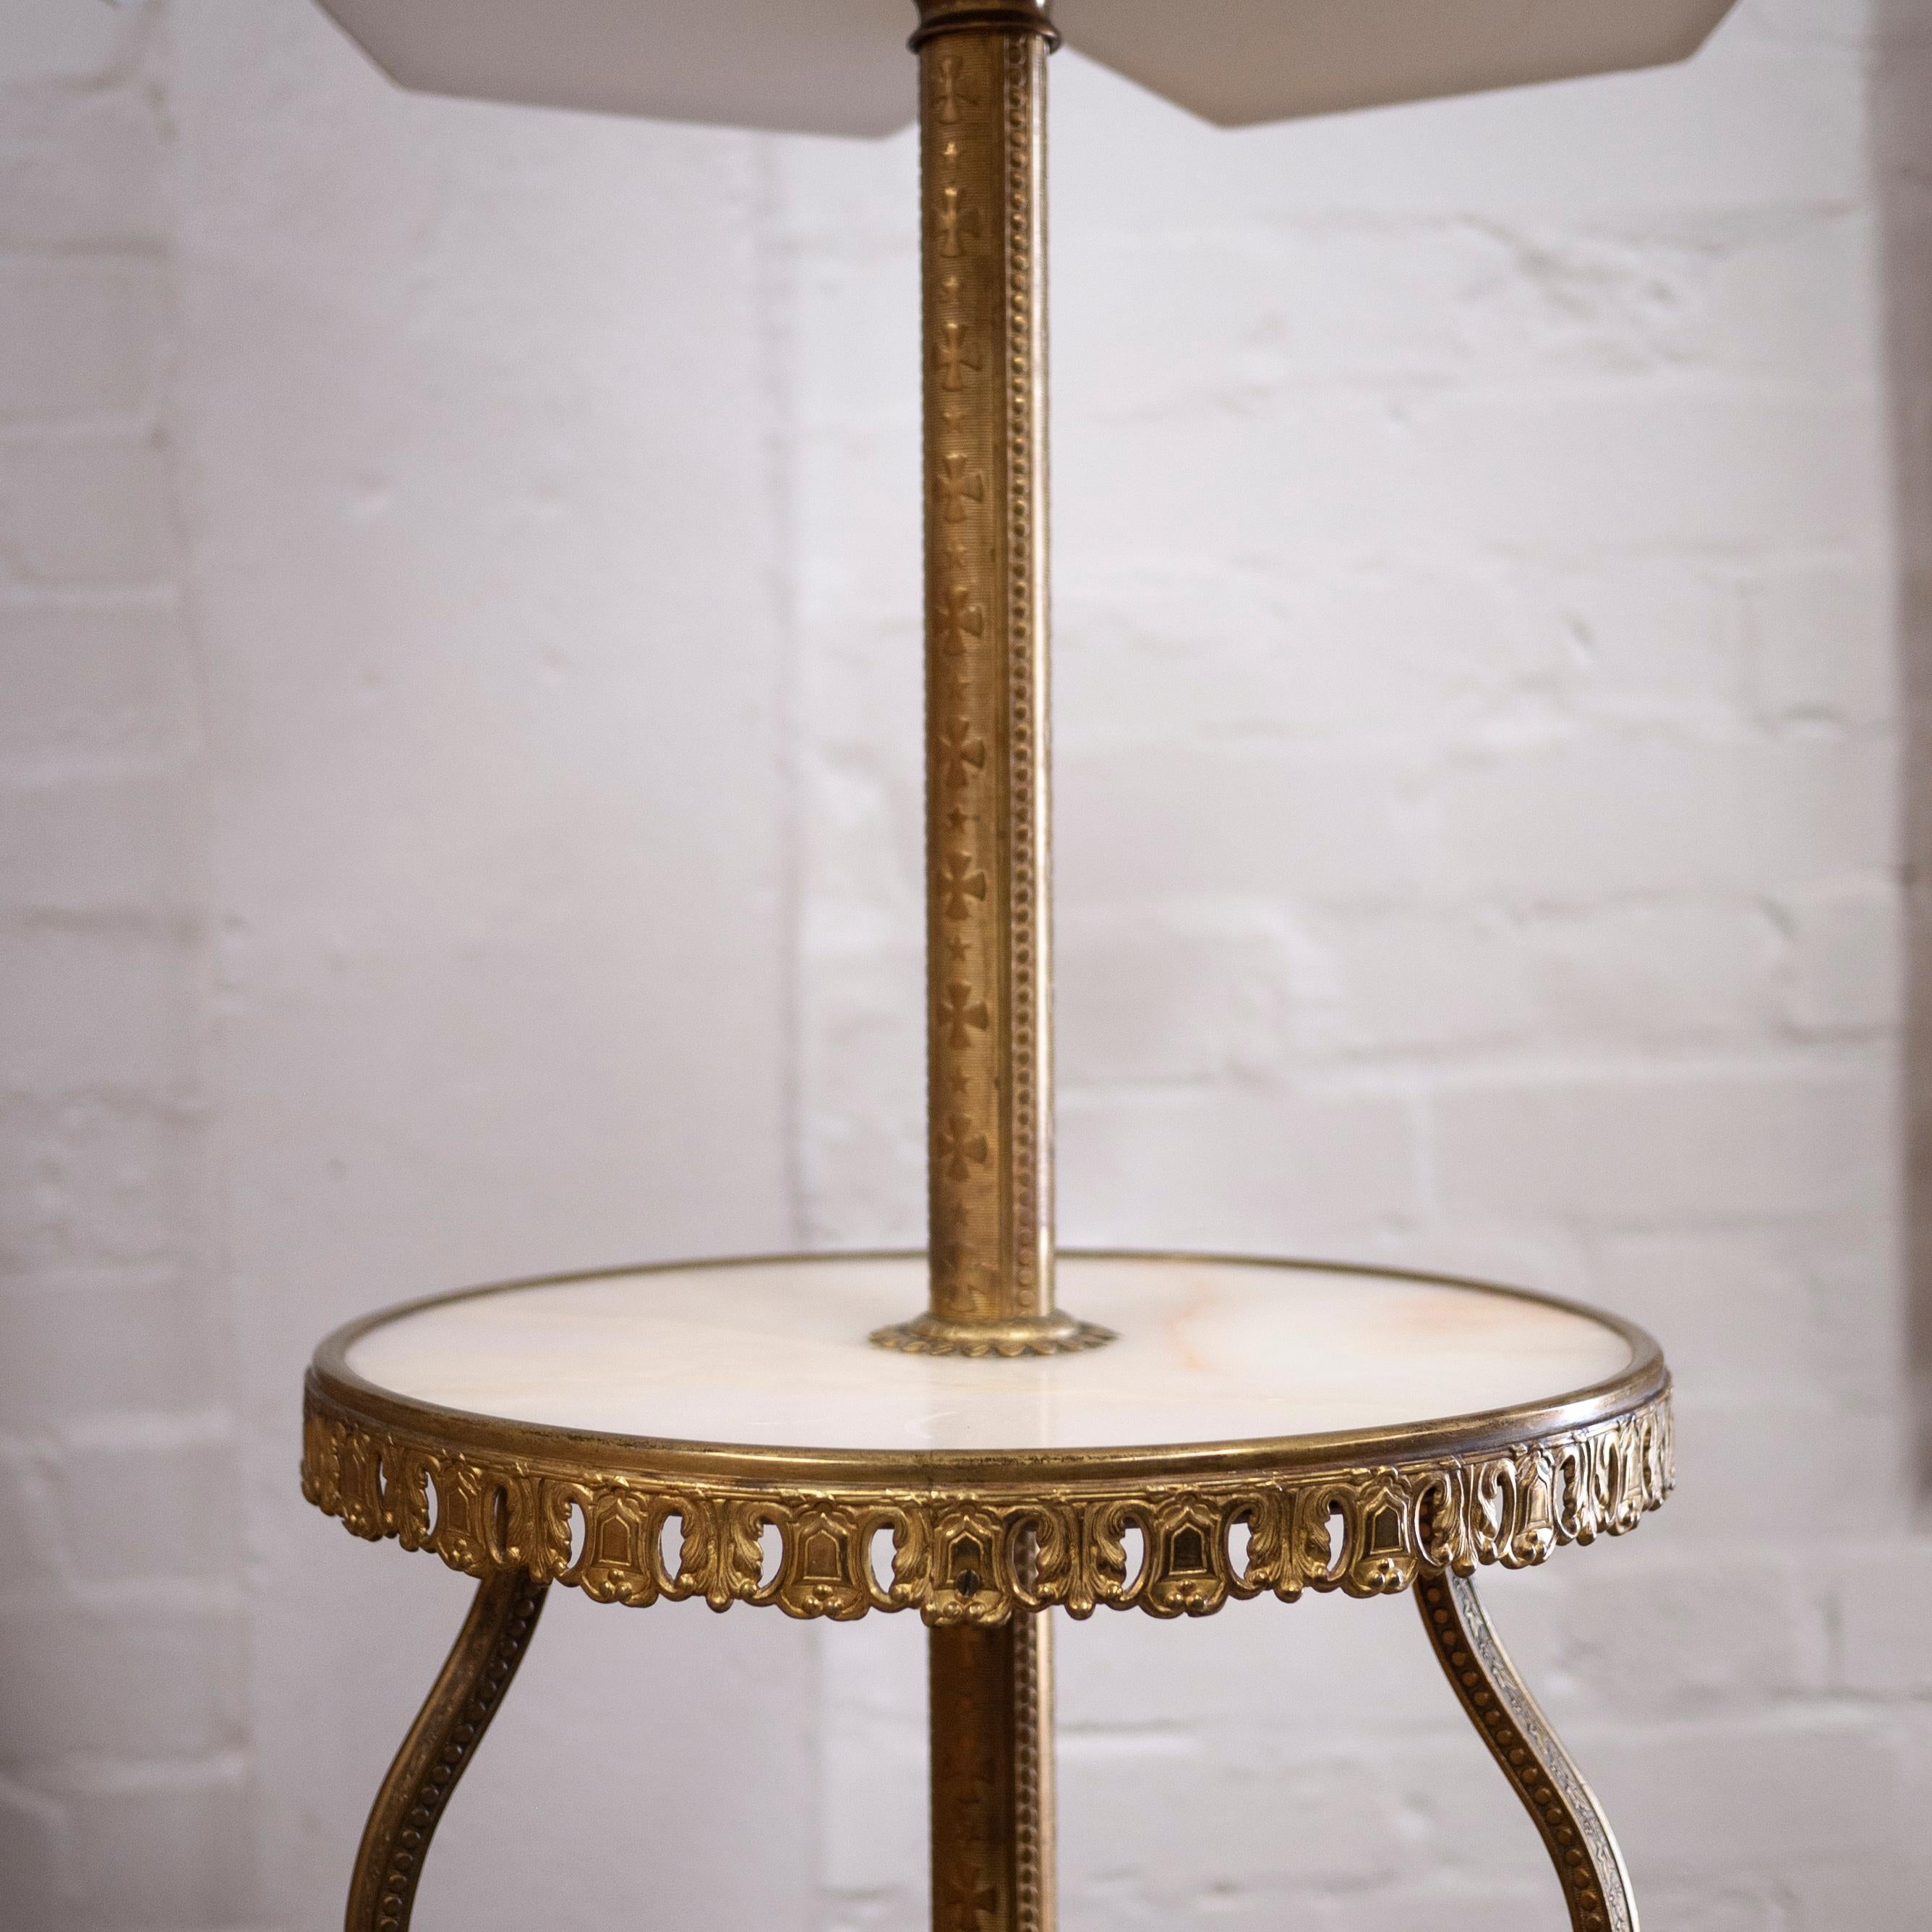 Vintage French Brass and Onyx Floor Lamp, 1930s For Sale 1